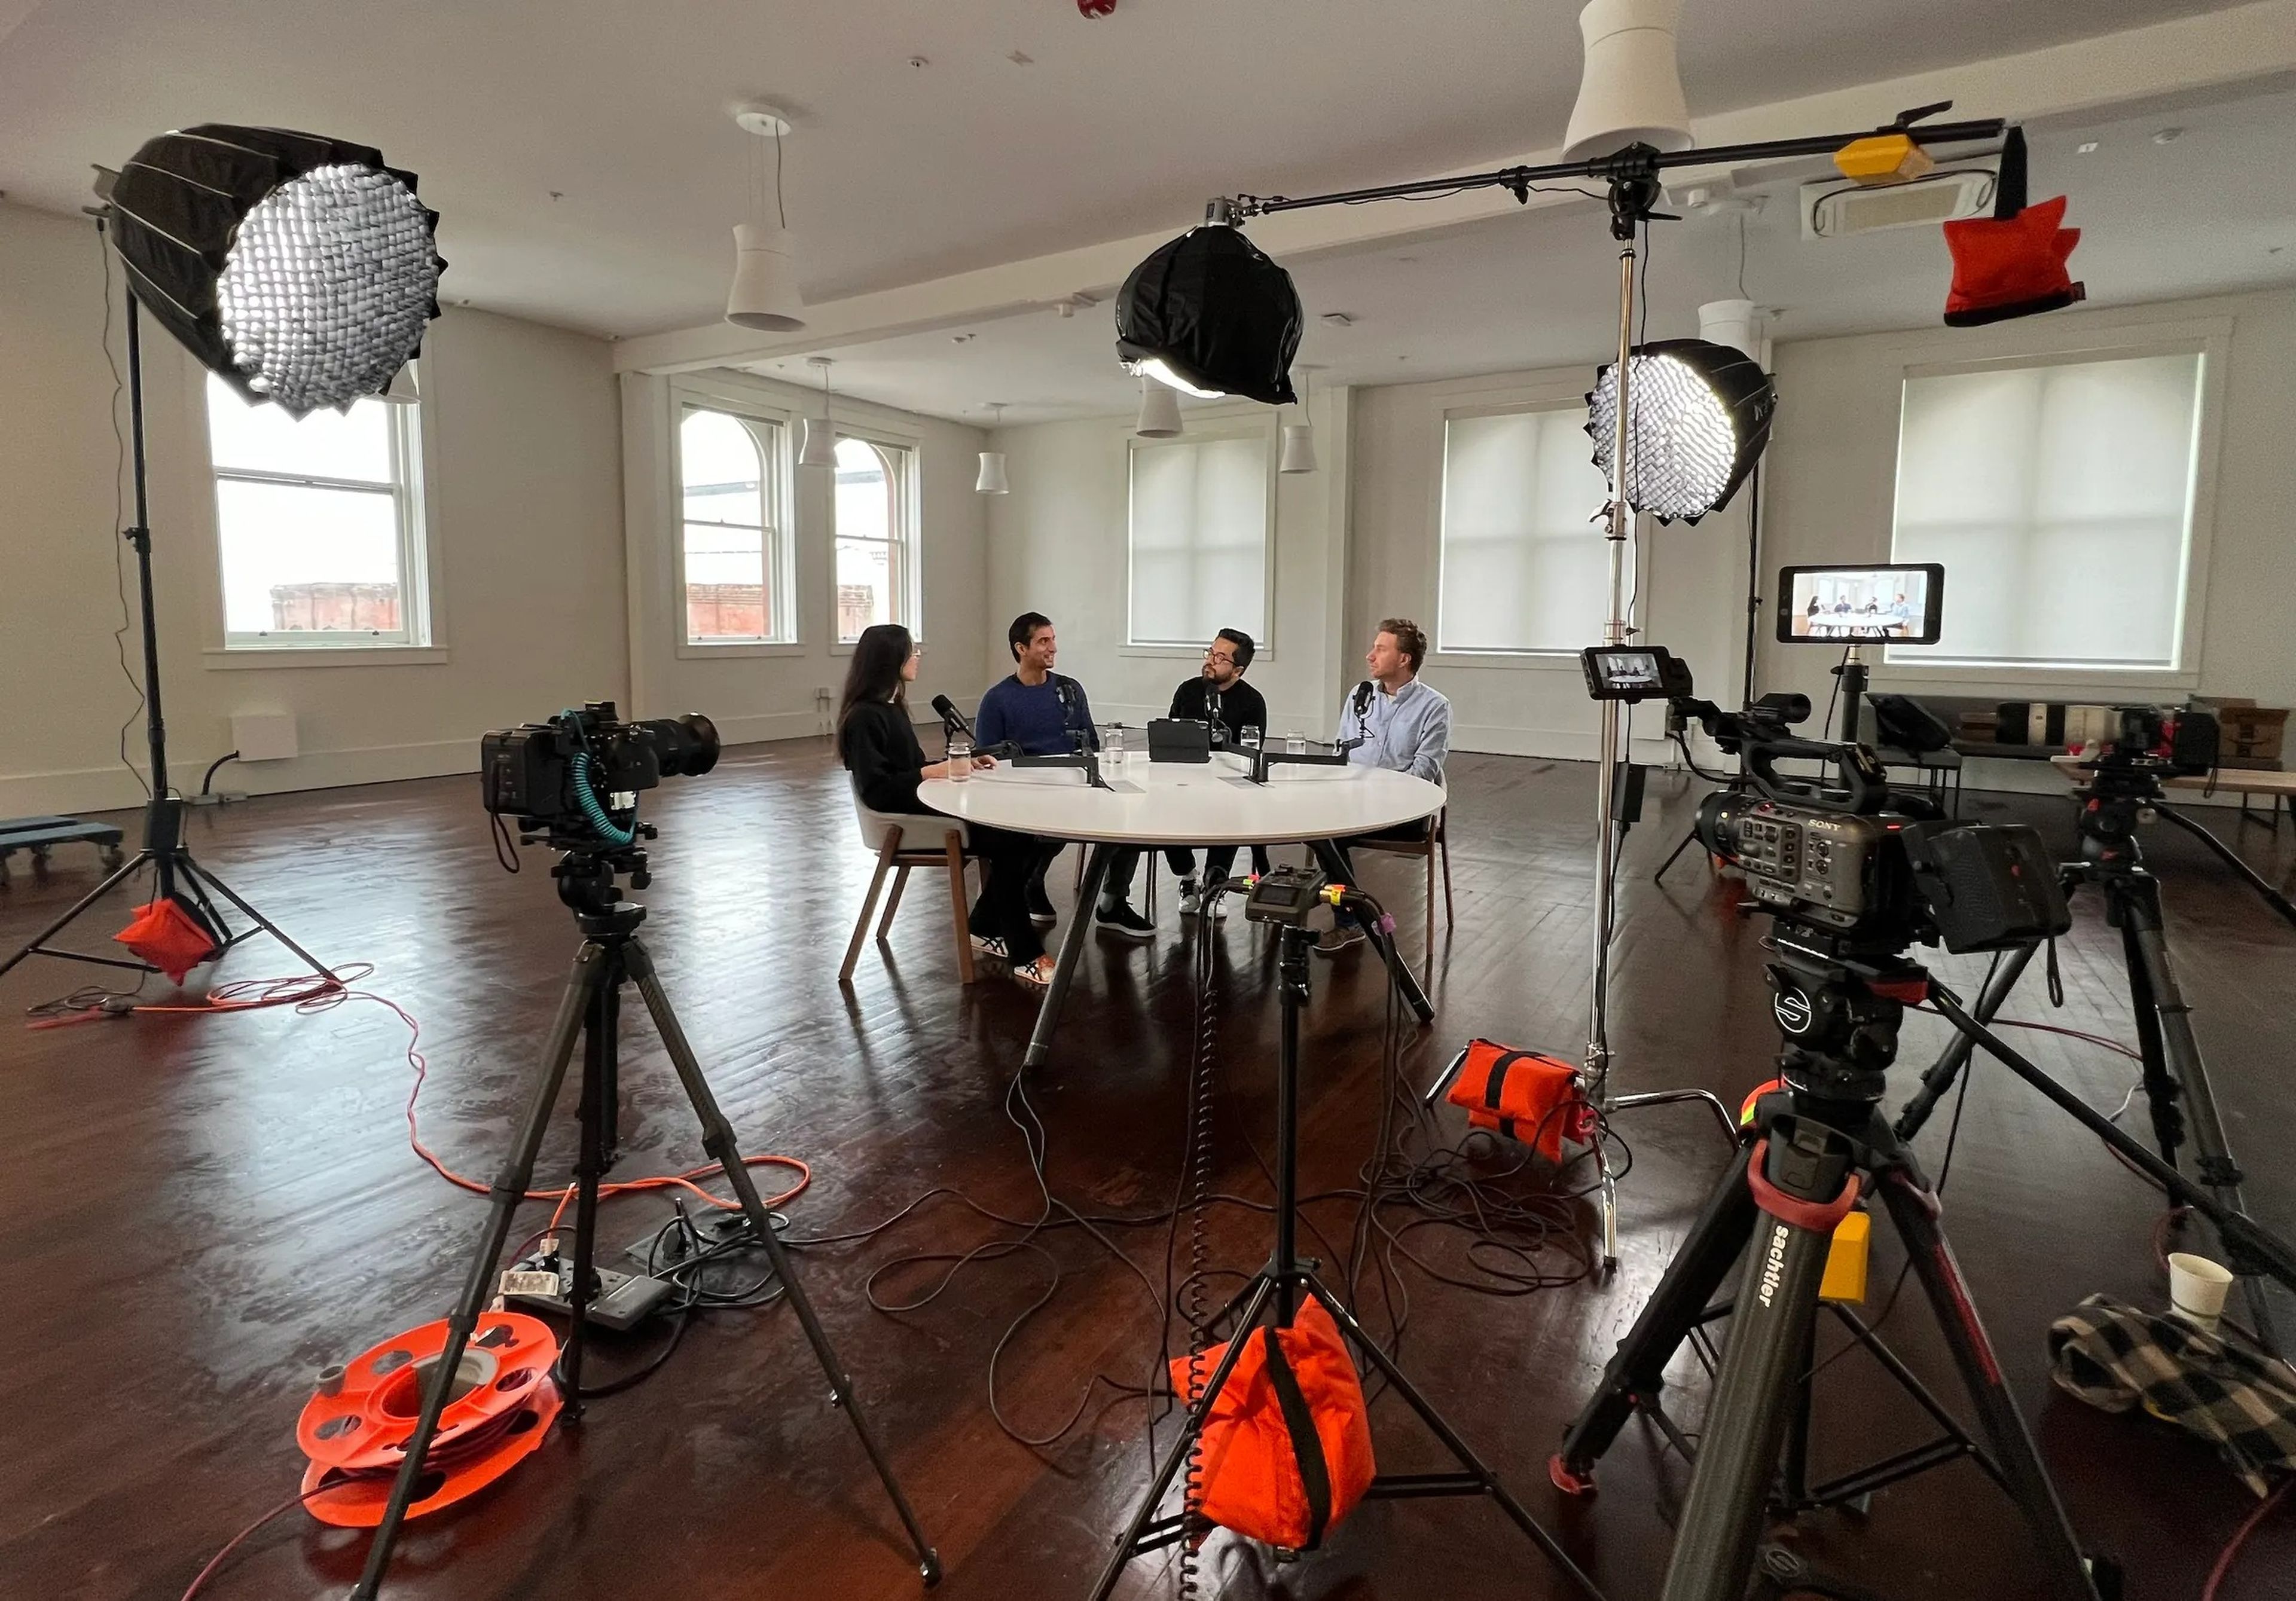 In a production studio complete with professional cameras and lighting fixtures, Y Combinator partners Diana Hu, Harj Taggar,  Garry Tan, and Jared Friedman record an episode of the Lightcone podcast.